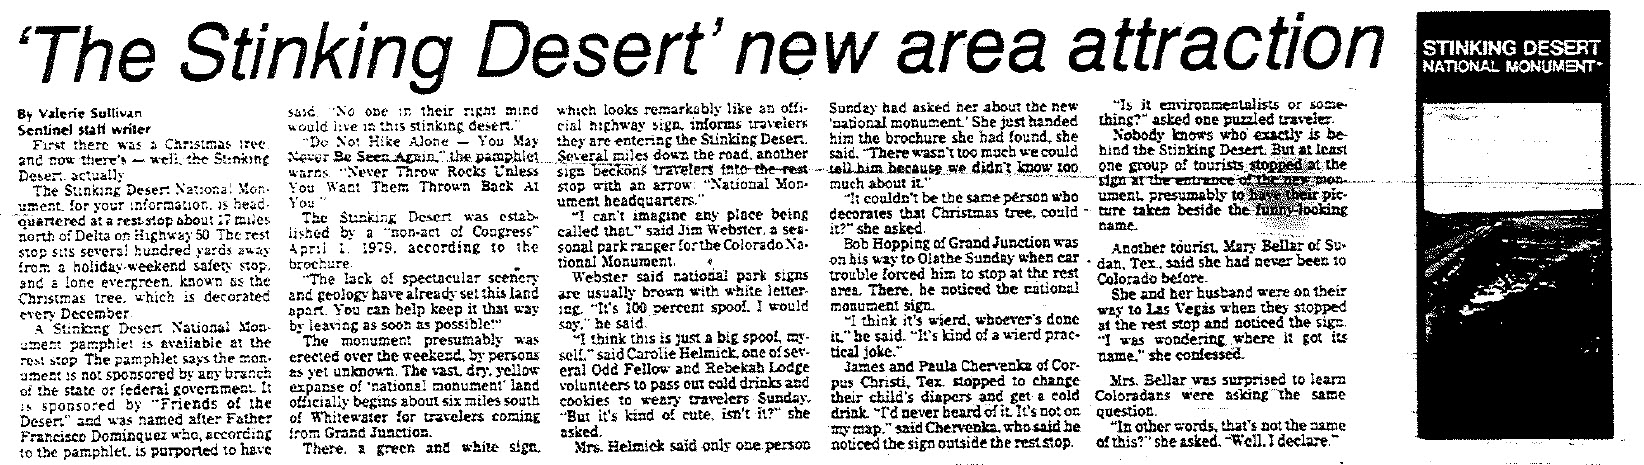 The Stinking Desert New Area Attraction (9-3-1979)